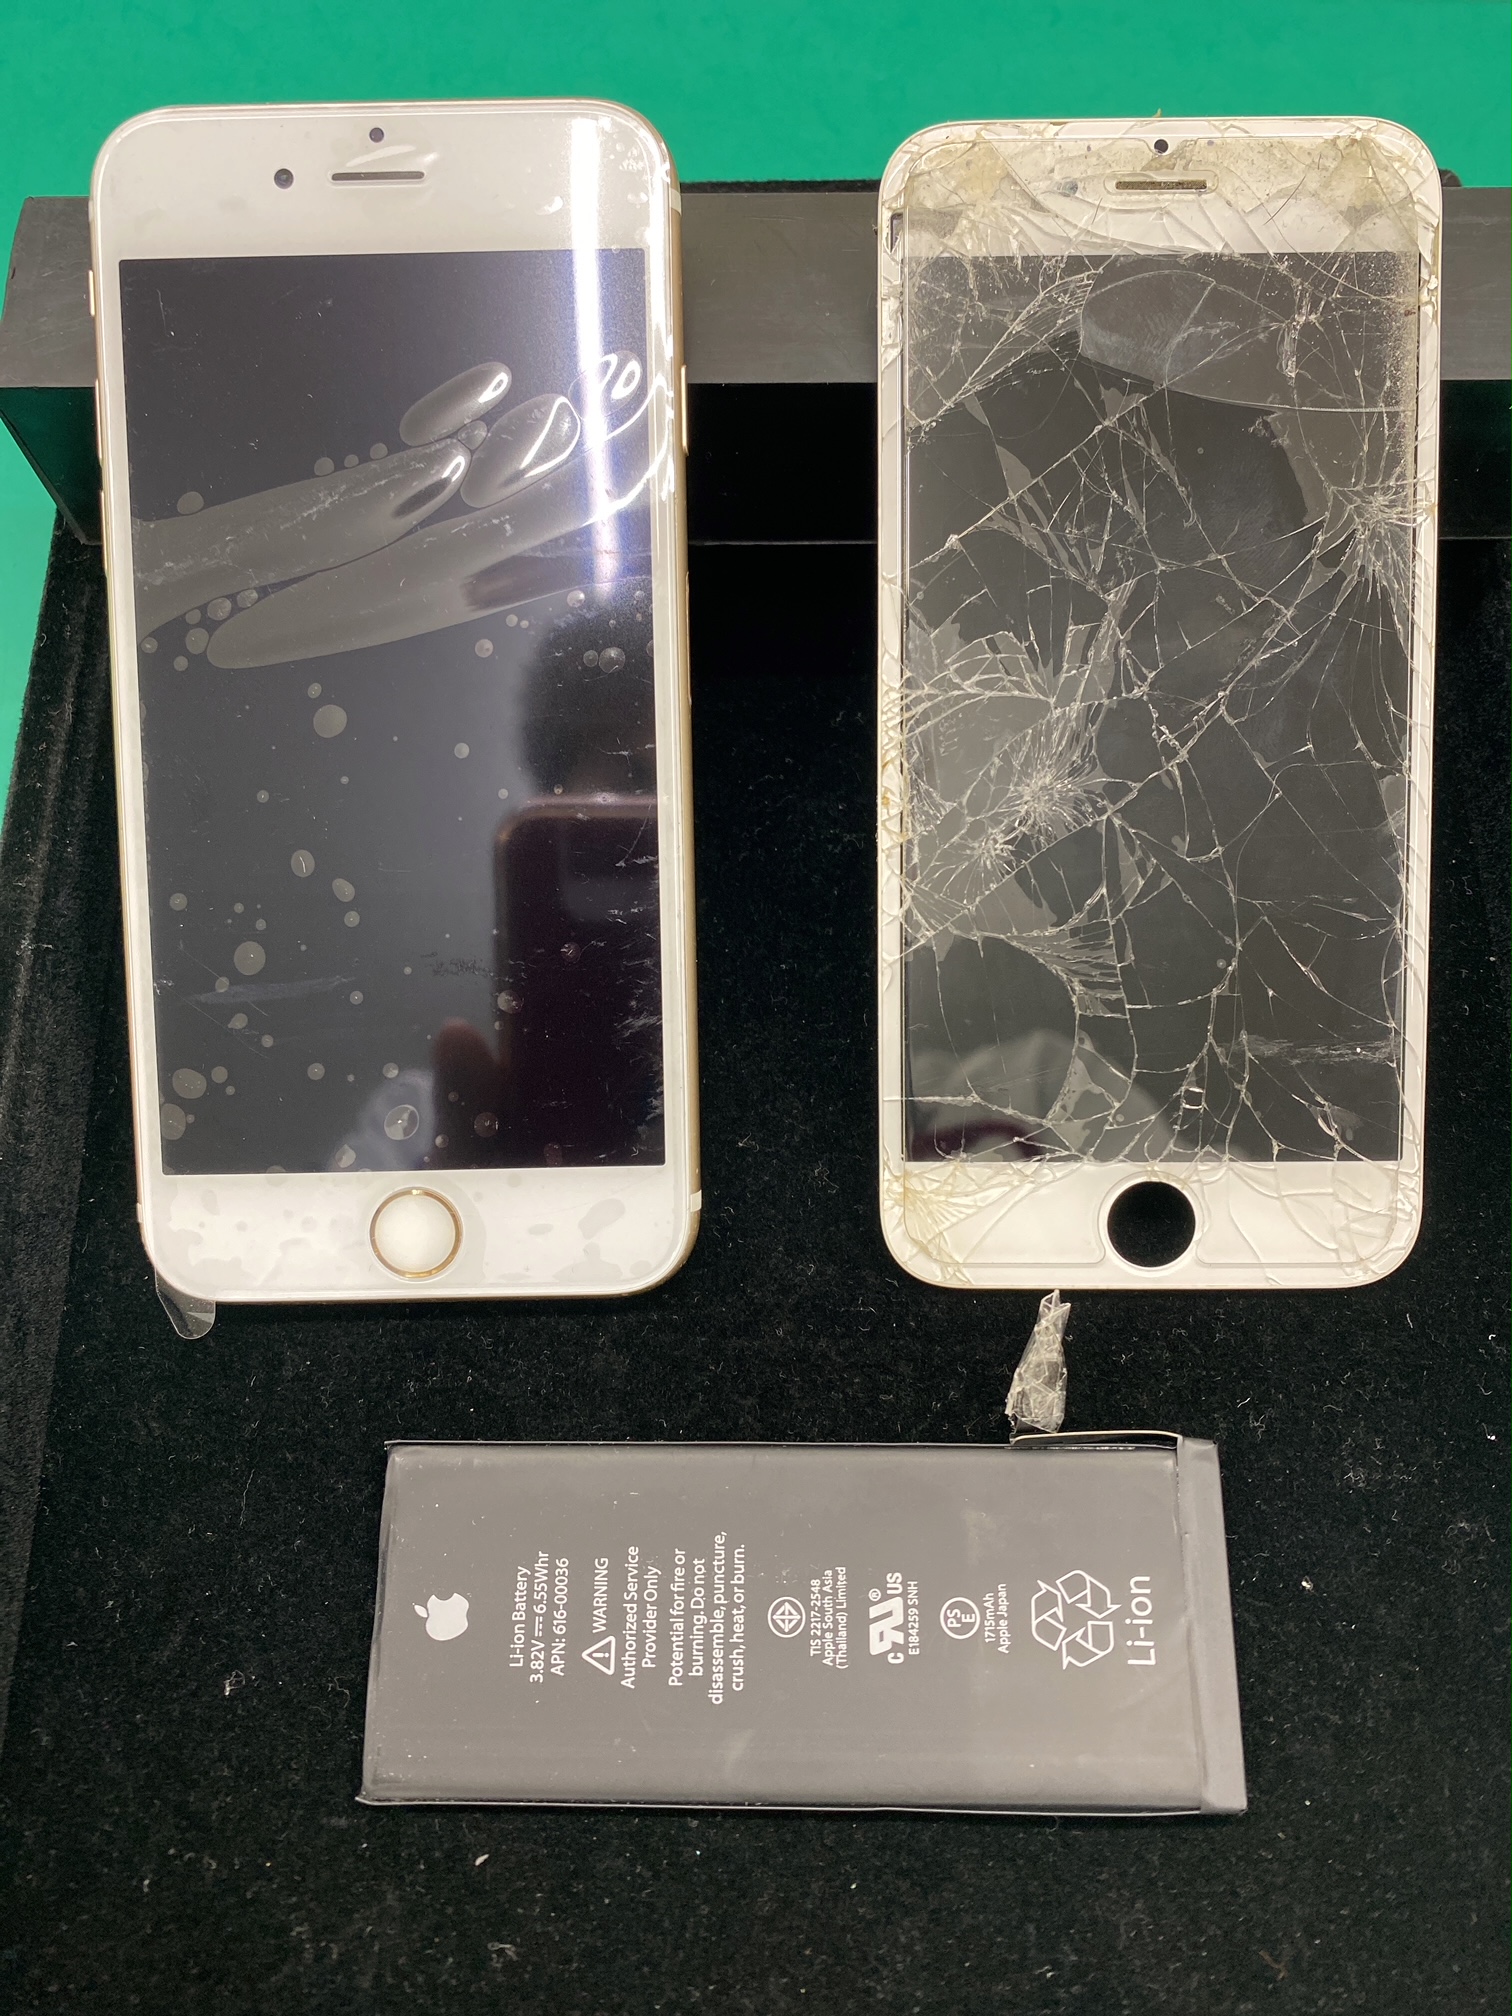 iPhone6sバッテリー交換・画面ガラス割れ修理でご来店頂きました